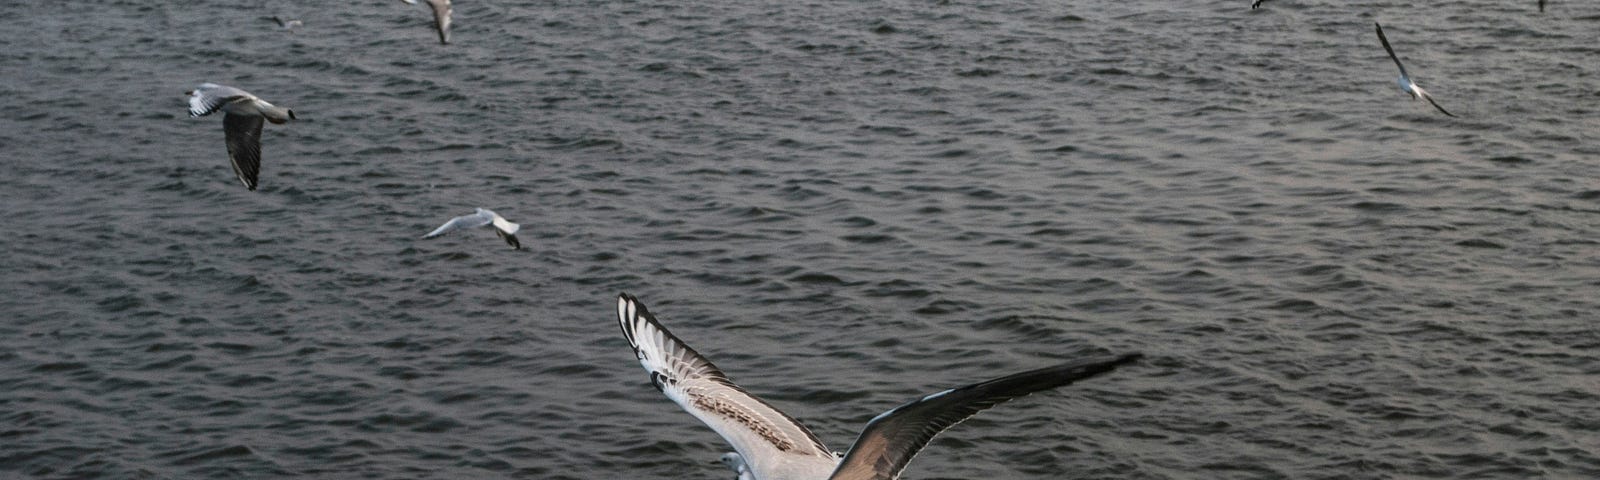 Birds flying over a large body of water.